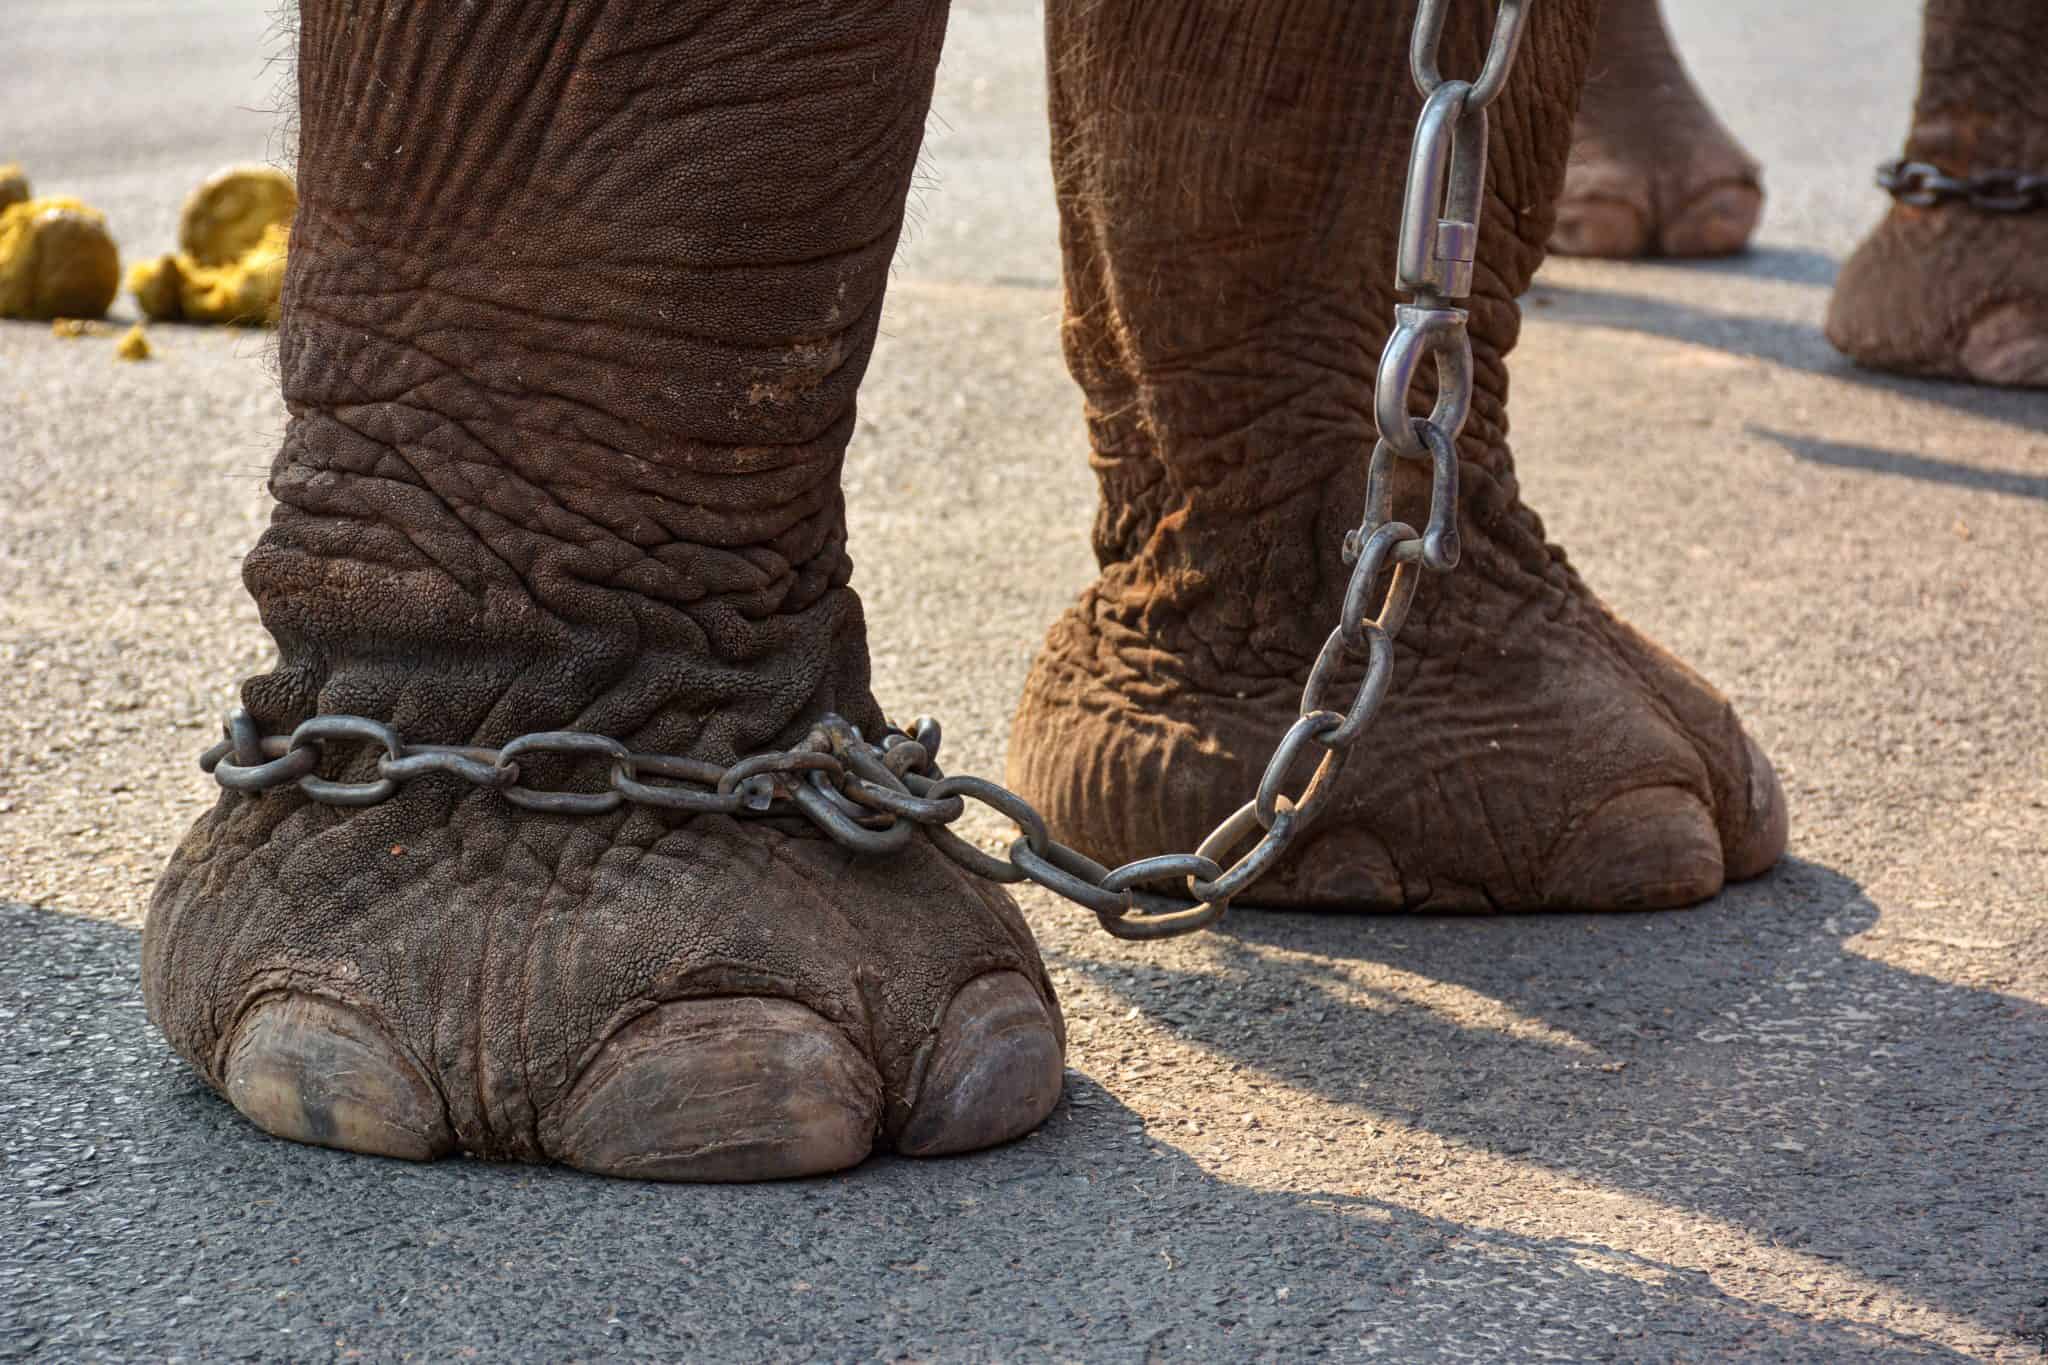 Petition: Strengthen Animal Cruelty Laws in Sri Lanka to Protect Elephants